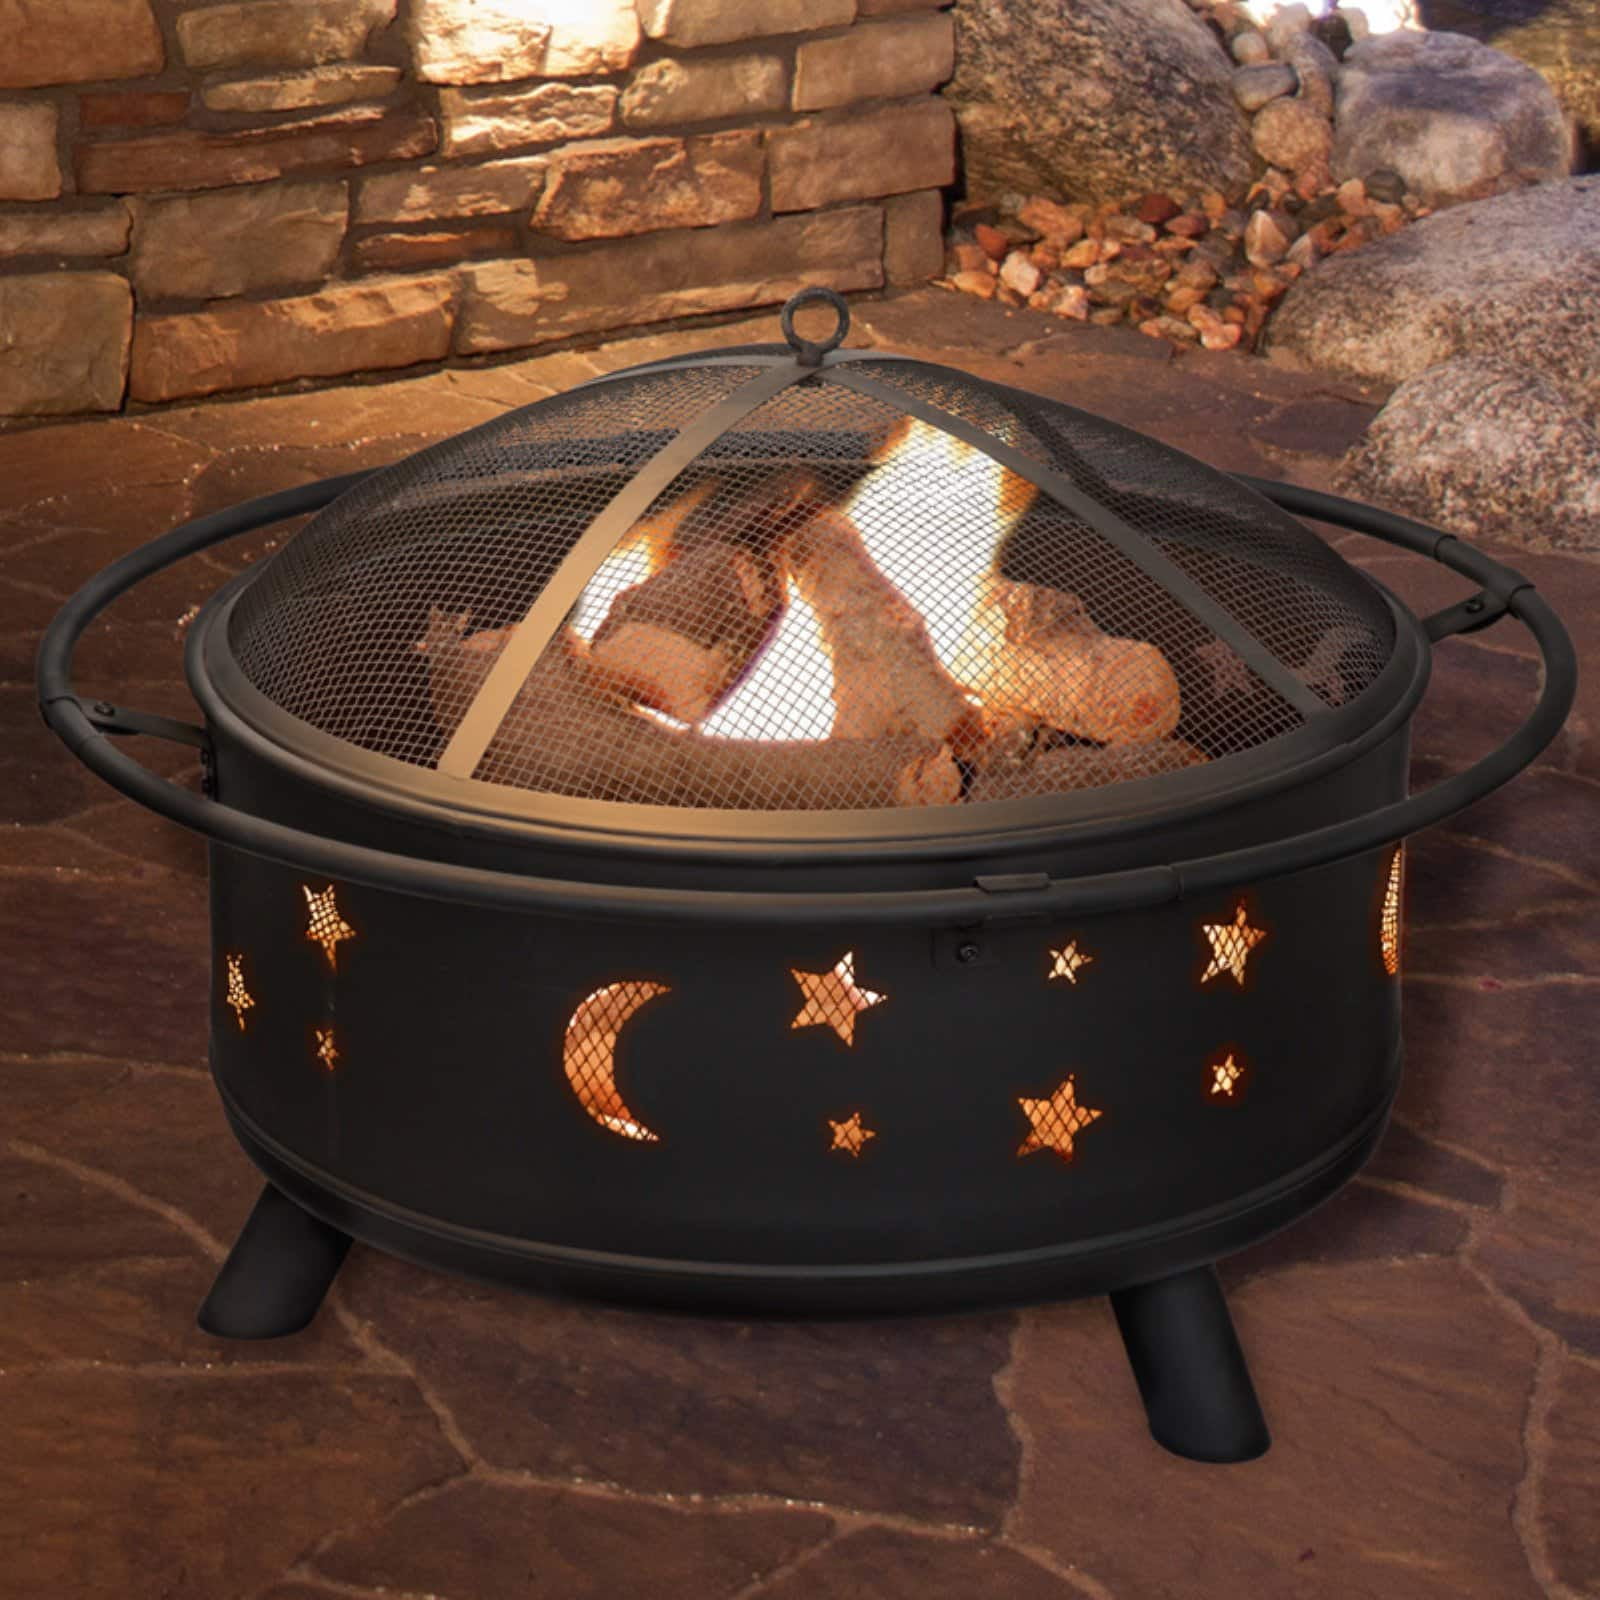 H Round Steel Wood Burning Outdoor Deep Fire Pit in Copper/Bla W x 20 in Details about   30 in 